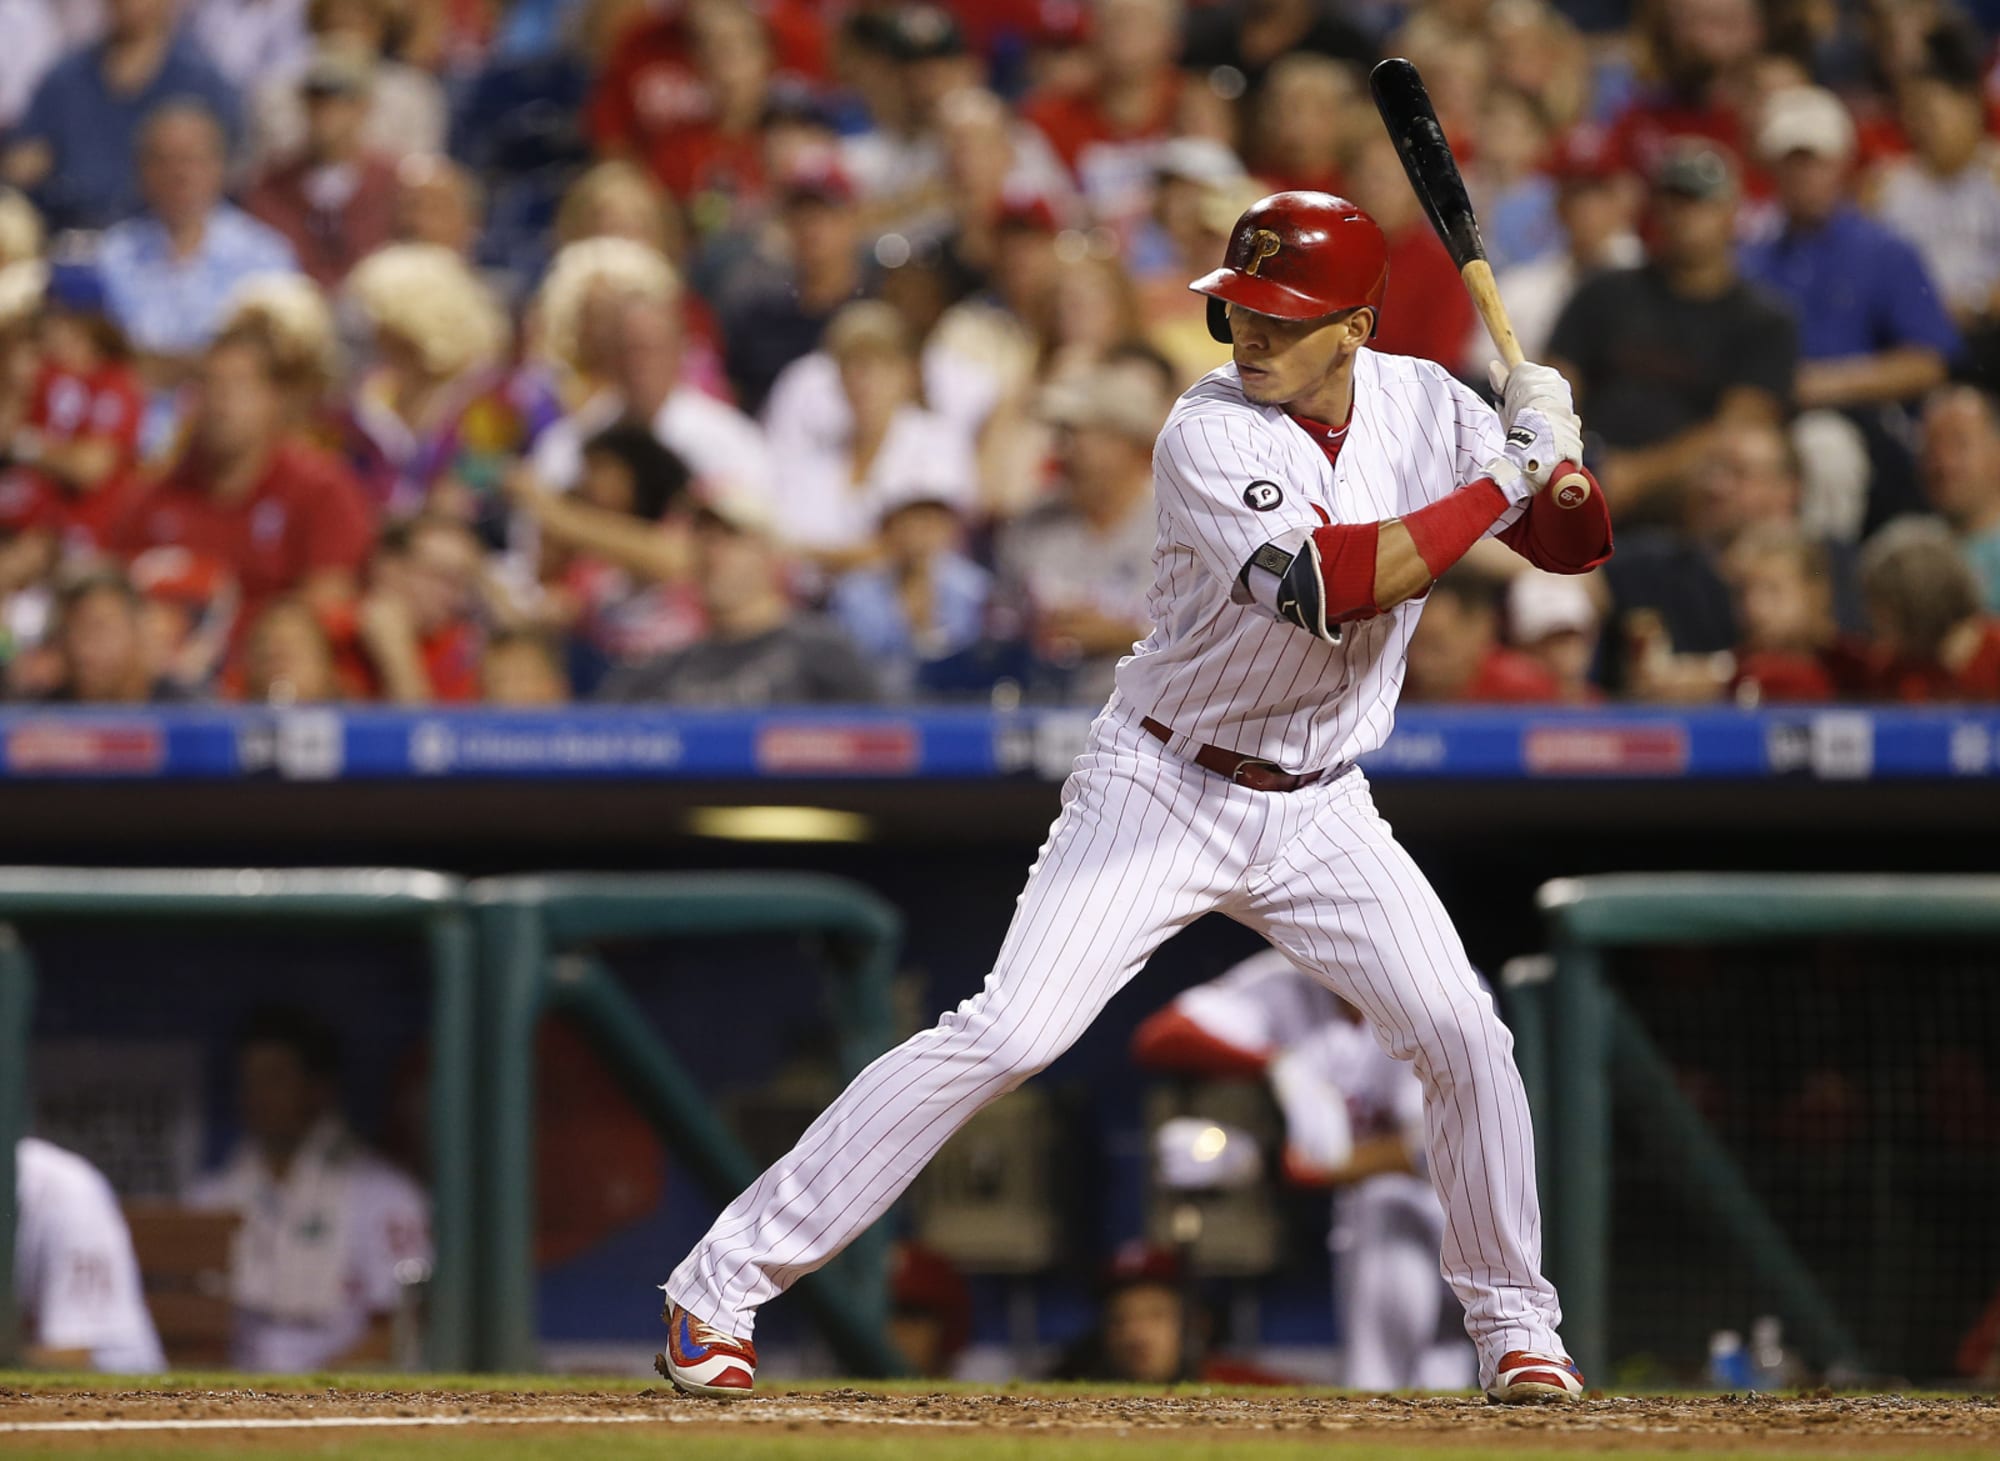 Phillies: Five players who could be traded this offseason